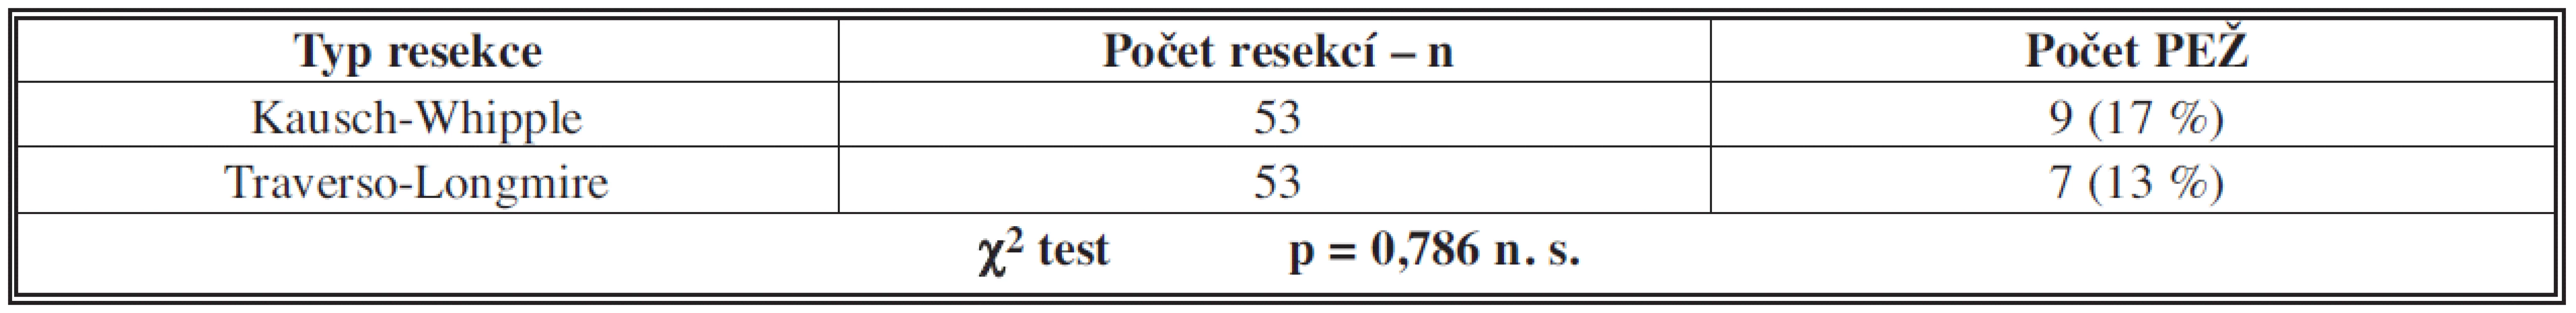 Výskyt poruchy evakuace žaludku podle typu resekce pankreatu
Tab. 3: Incidence of delayed gastric emptying depending on the type of pancreatic resection